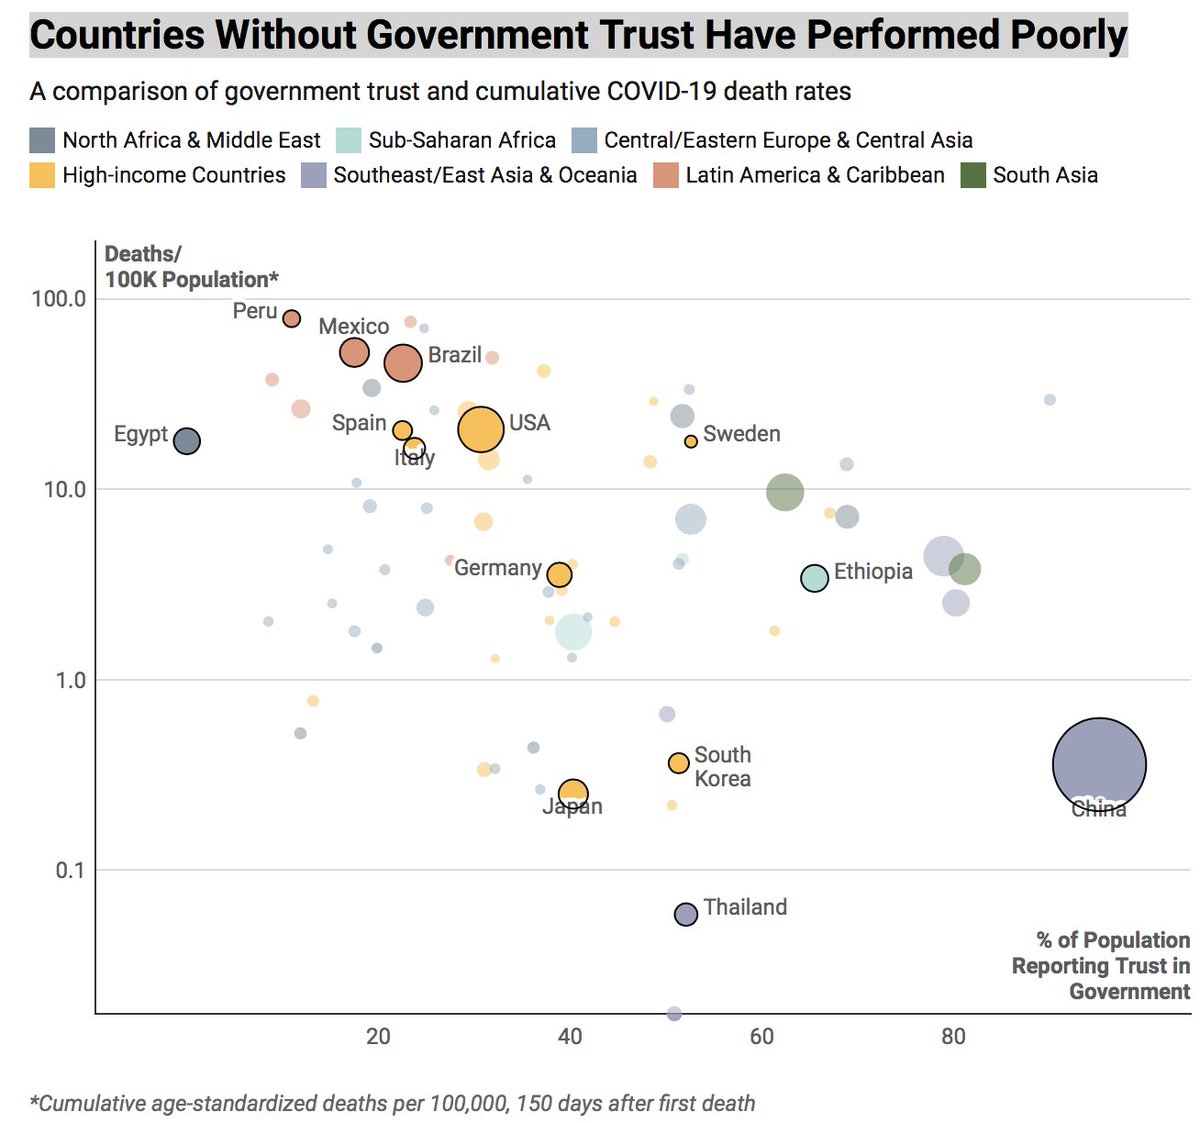 Countries without government trust have performed badly in  #COVID19, even when you account for differences in population age and size, and the timing of the pandemicNew analysis in  @ForeignAffairs via  @samckiernan, Sawyer Crosby  @IHME_UW, and me 1/ https://www.foreignaffairs.com/articles/united-states/2020-10-23/coronavirus-fighting-requires-trust